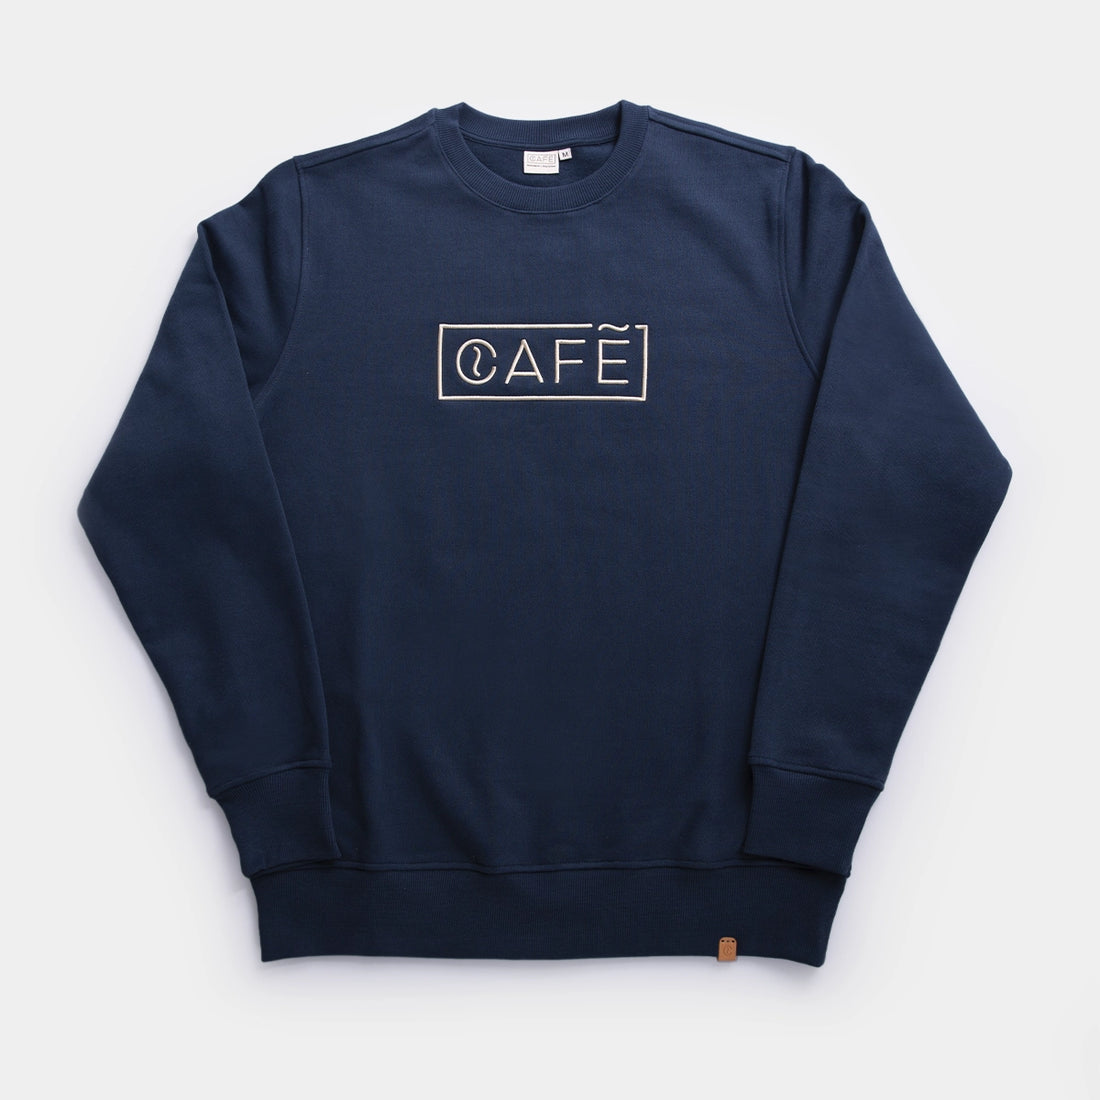 The Café Logo Embroidery Sweater in Navy